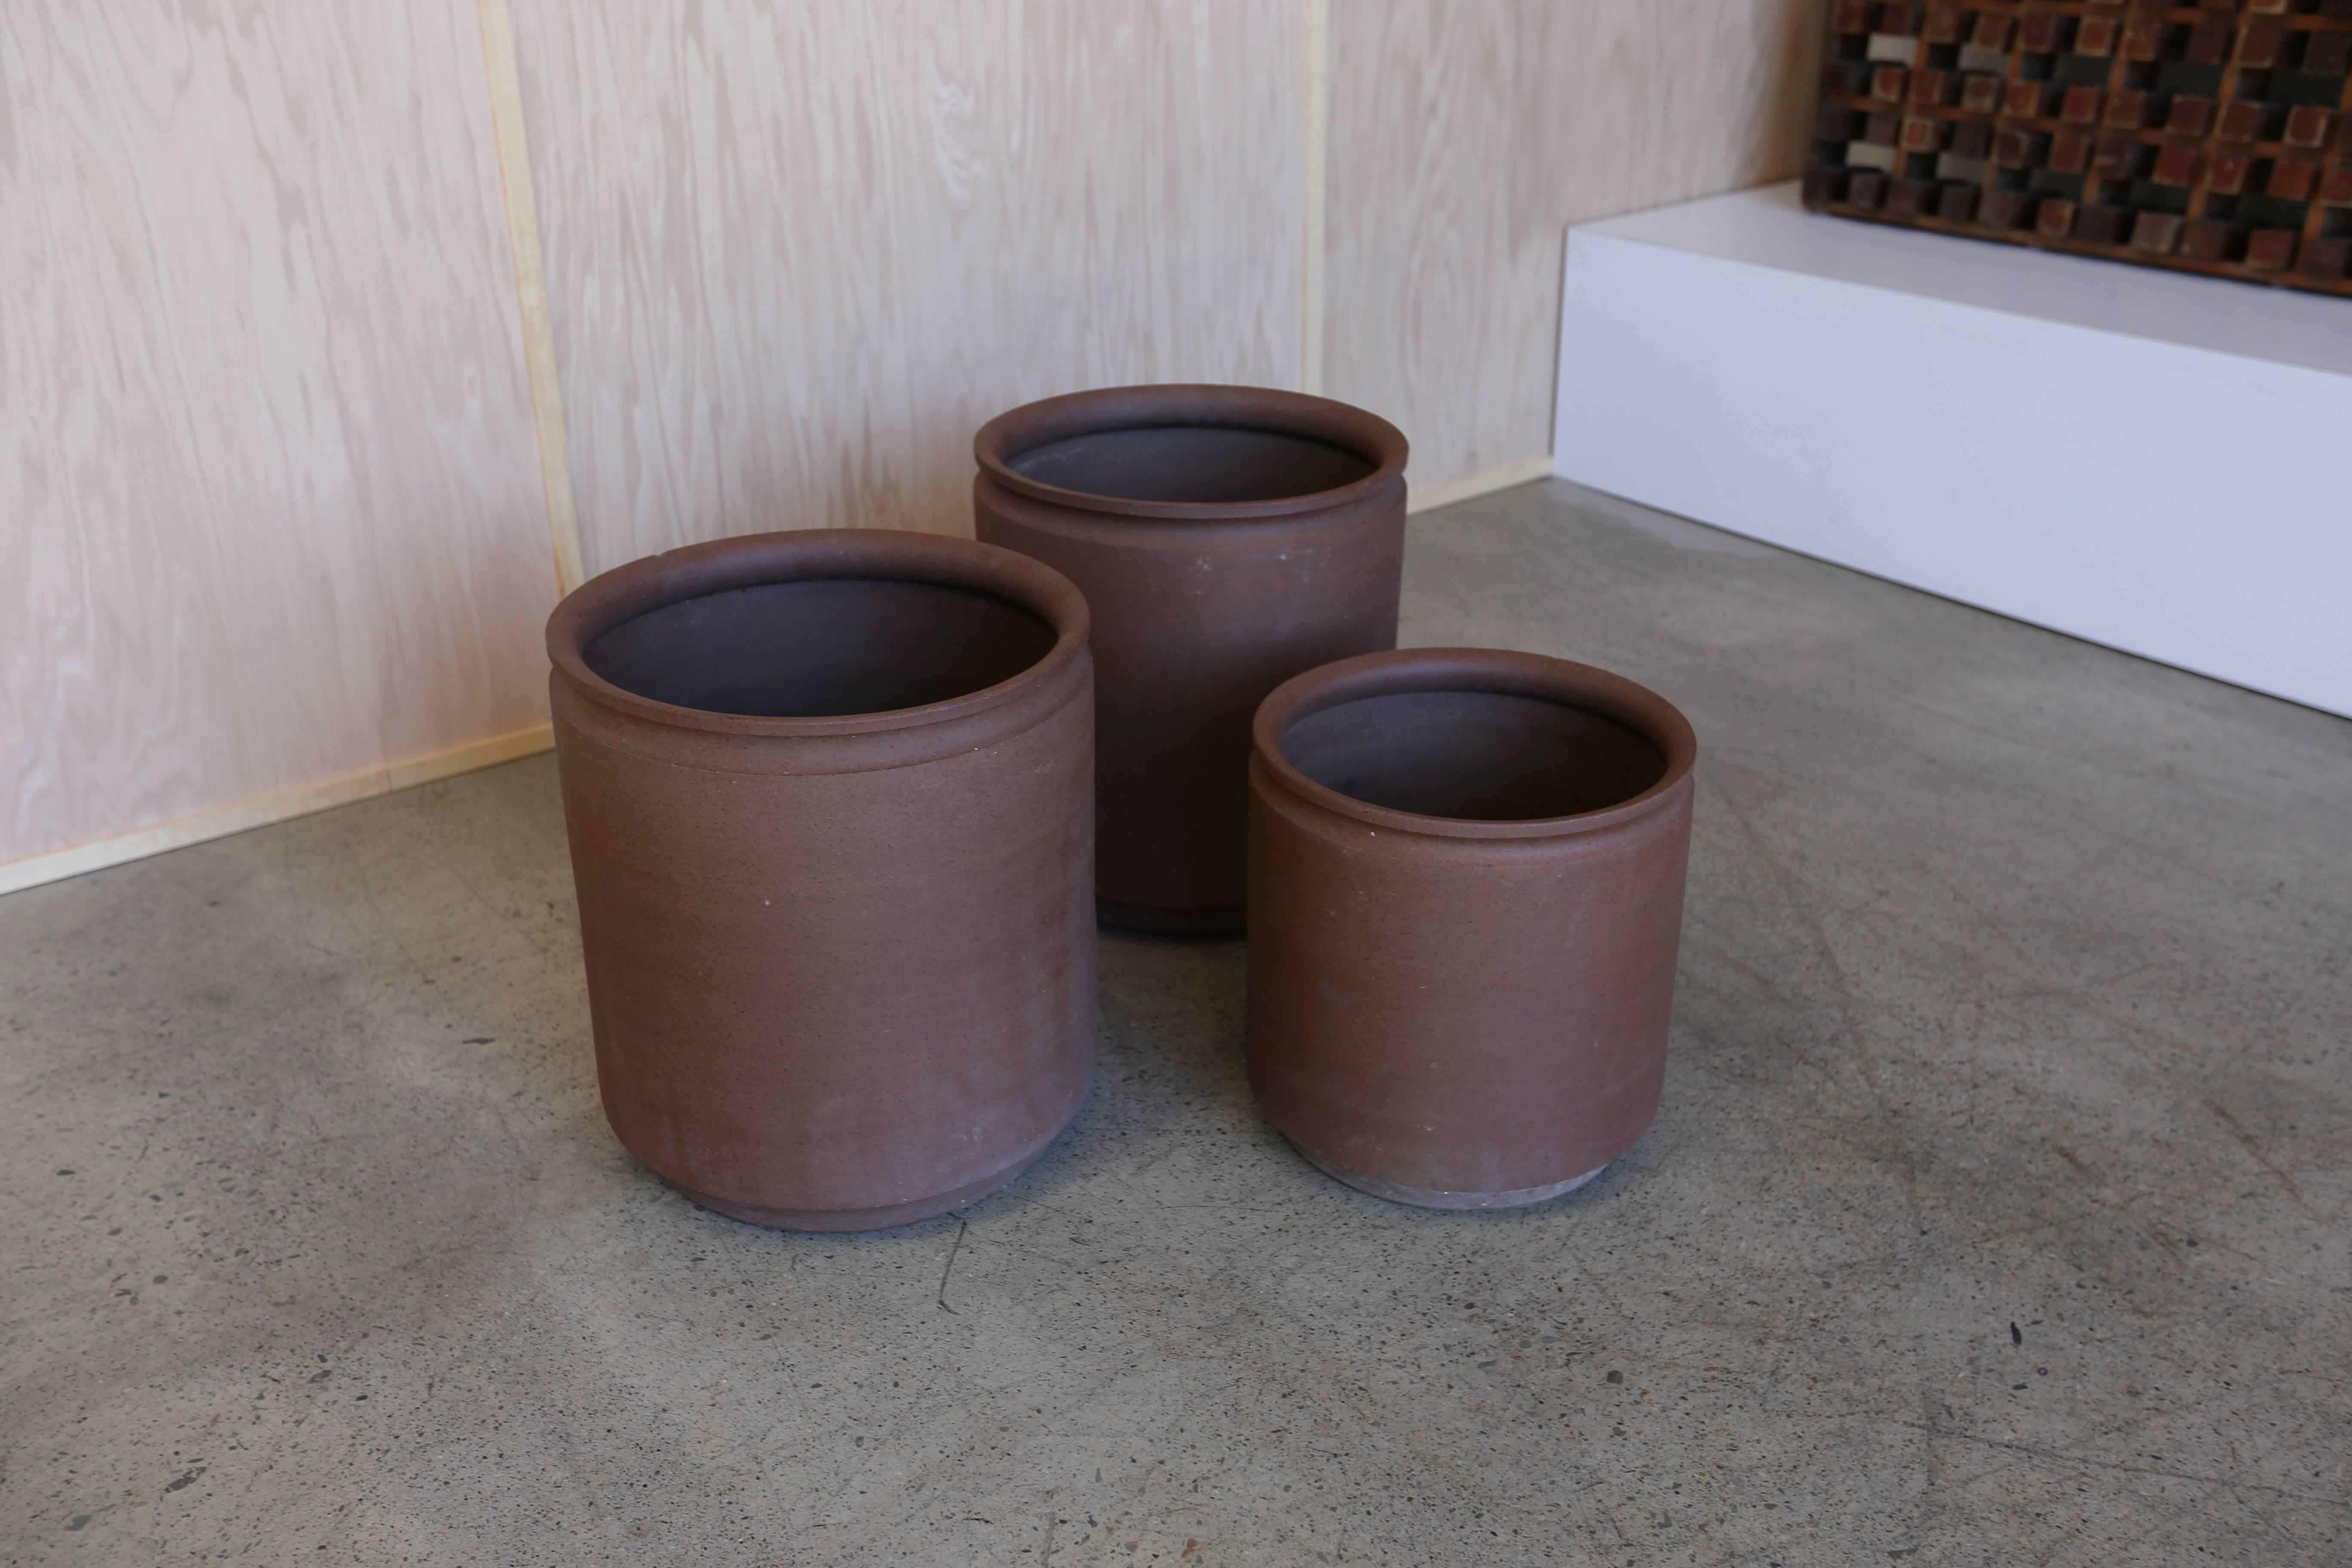 Group of three ceramic planters by David Cressey and Robert Maxwell for Earthgender Ceramics. 
Two planters measure: 17.25" x 18" x 19.5" tall. 

 One planter measures: 14.75 x 14.75 x 15.25" tall.